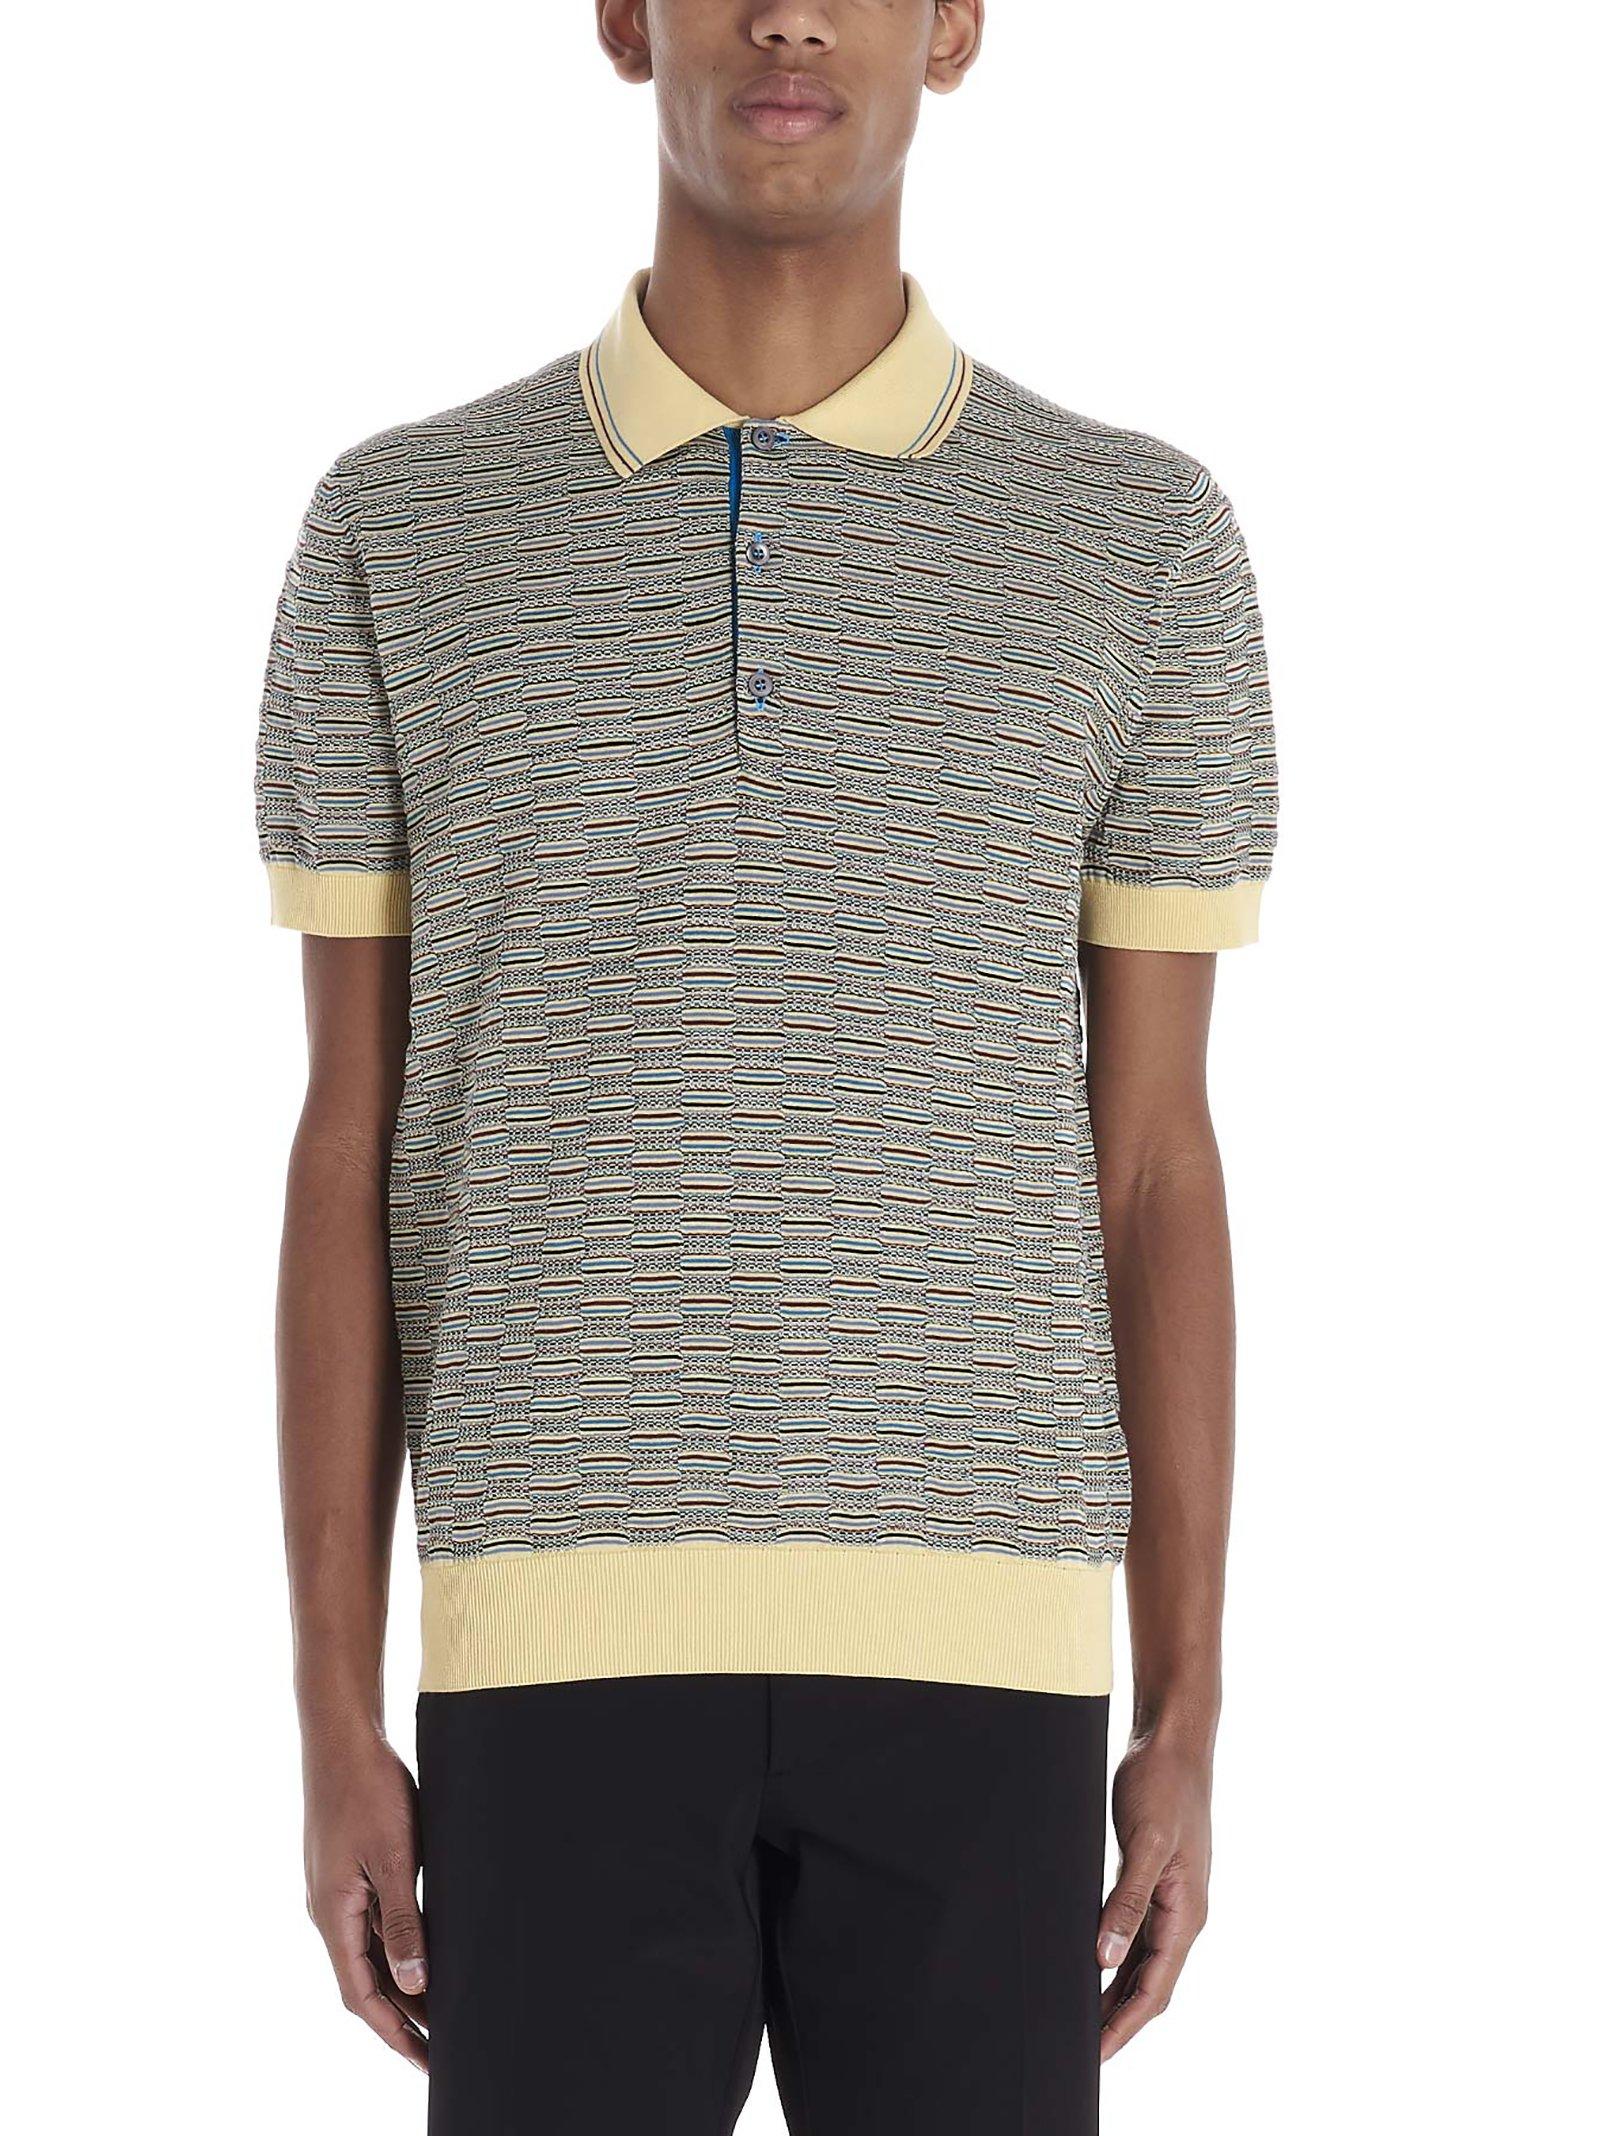 Prada Cotton Jaquard Polo in Gray for Men - Save 13% - Lyst